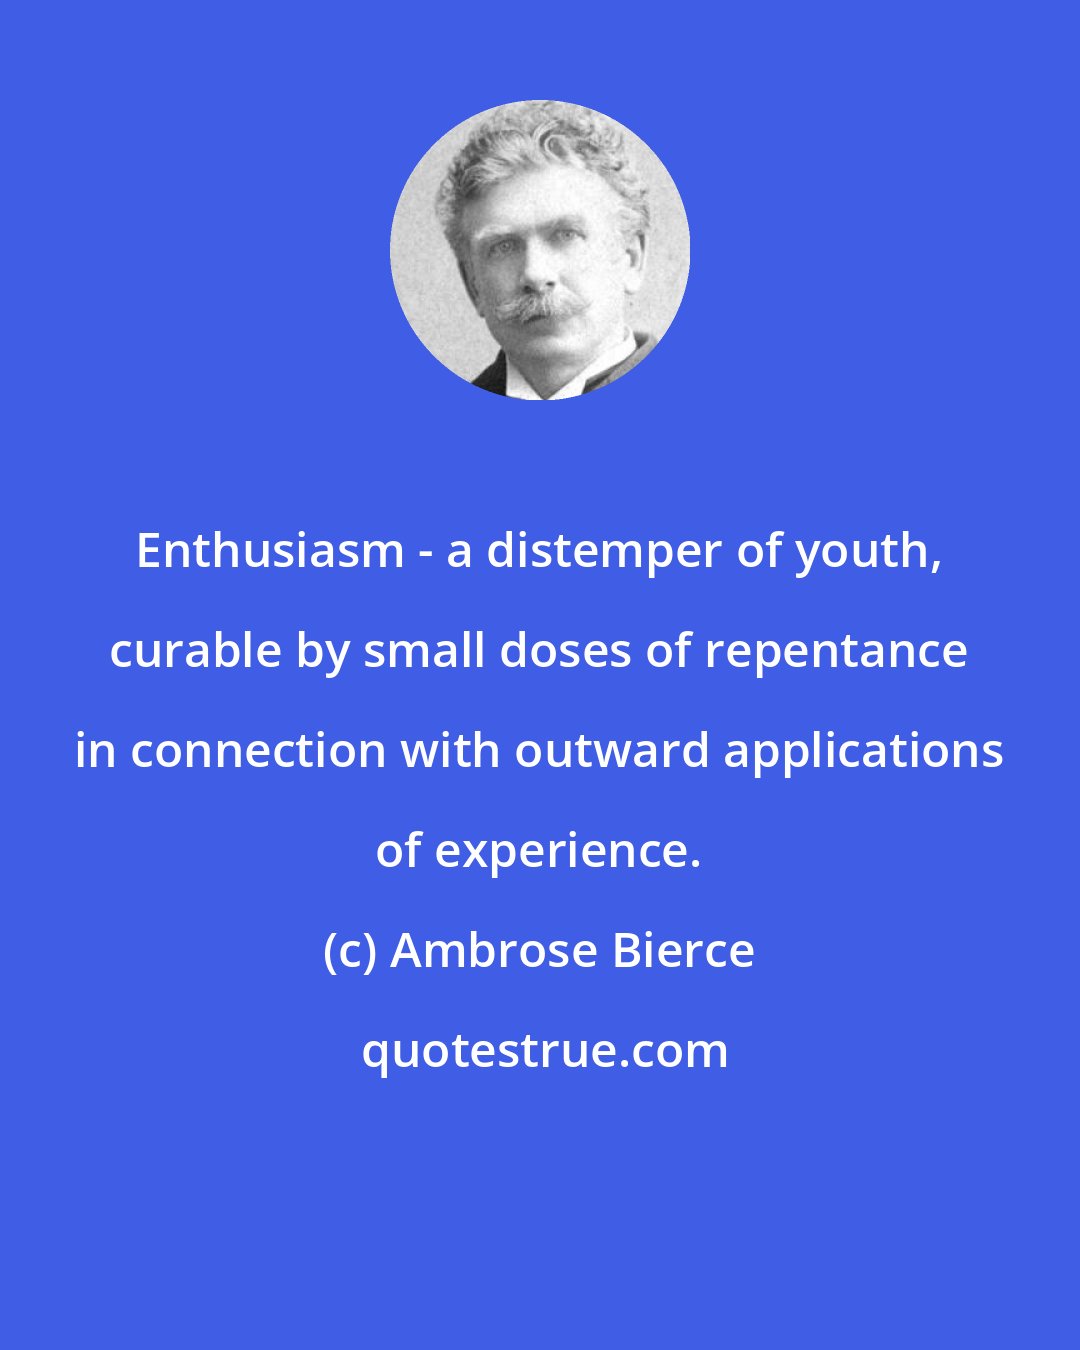 Ambrose Bierce: Enthusiasm - a distemper of youth, curable by small doses of repentance in connection with outward applications of experience.